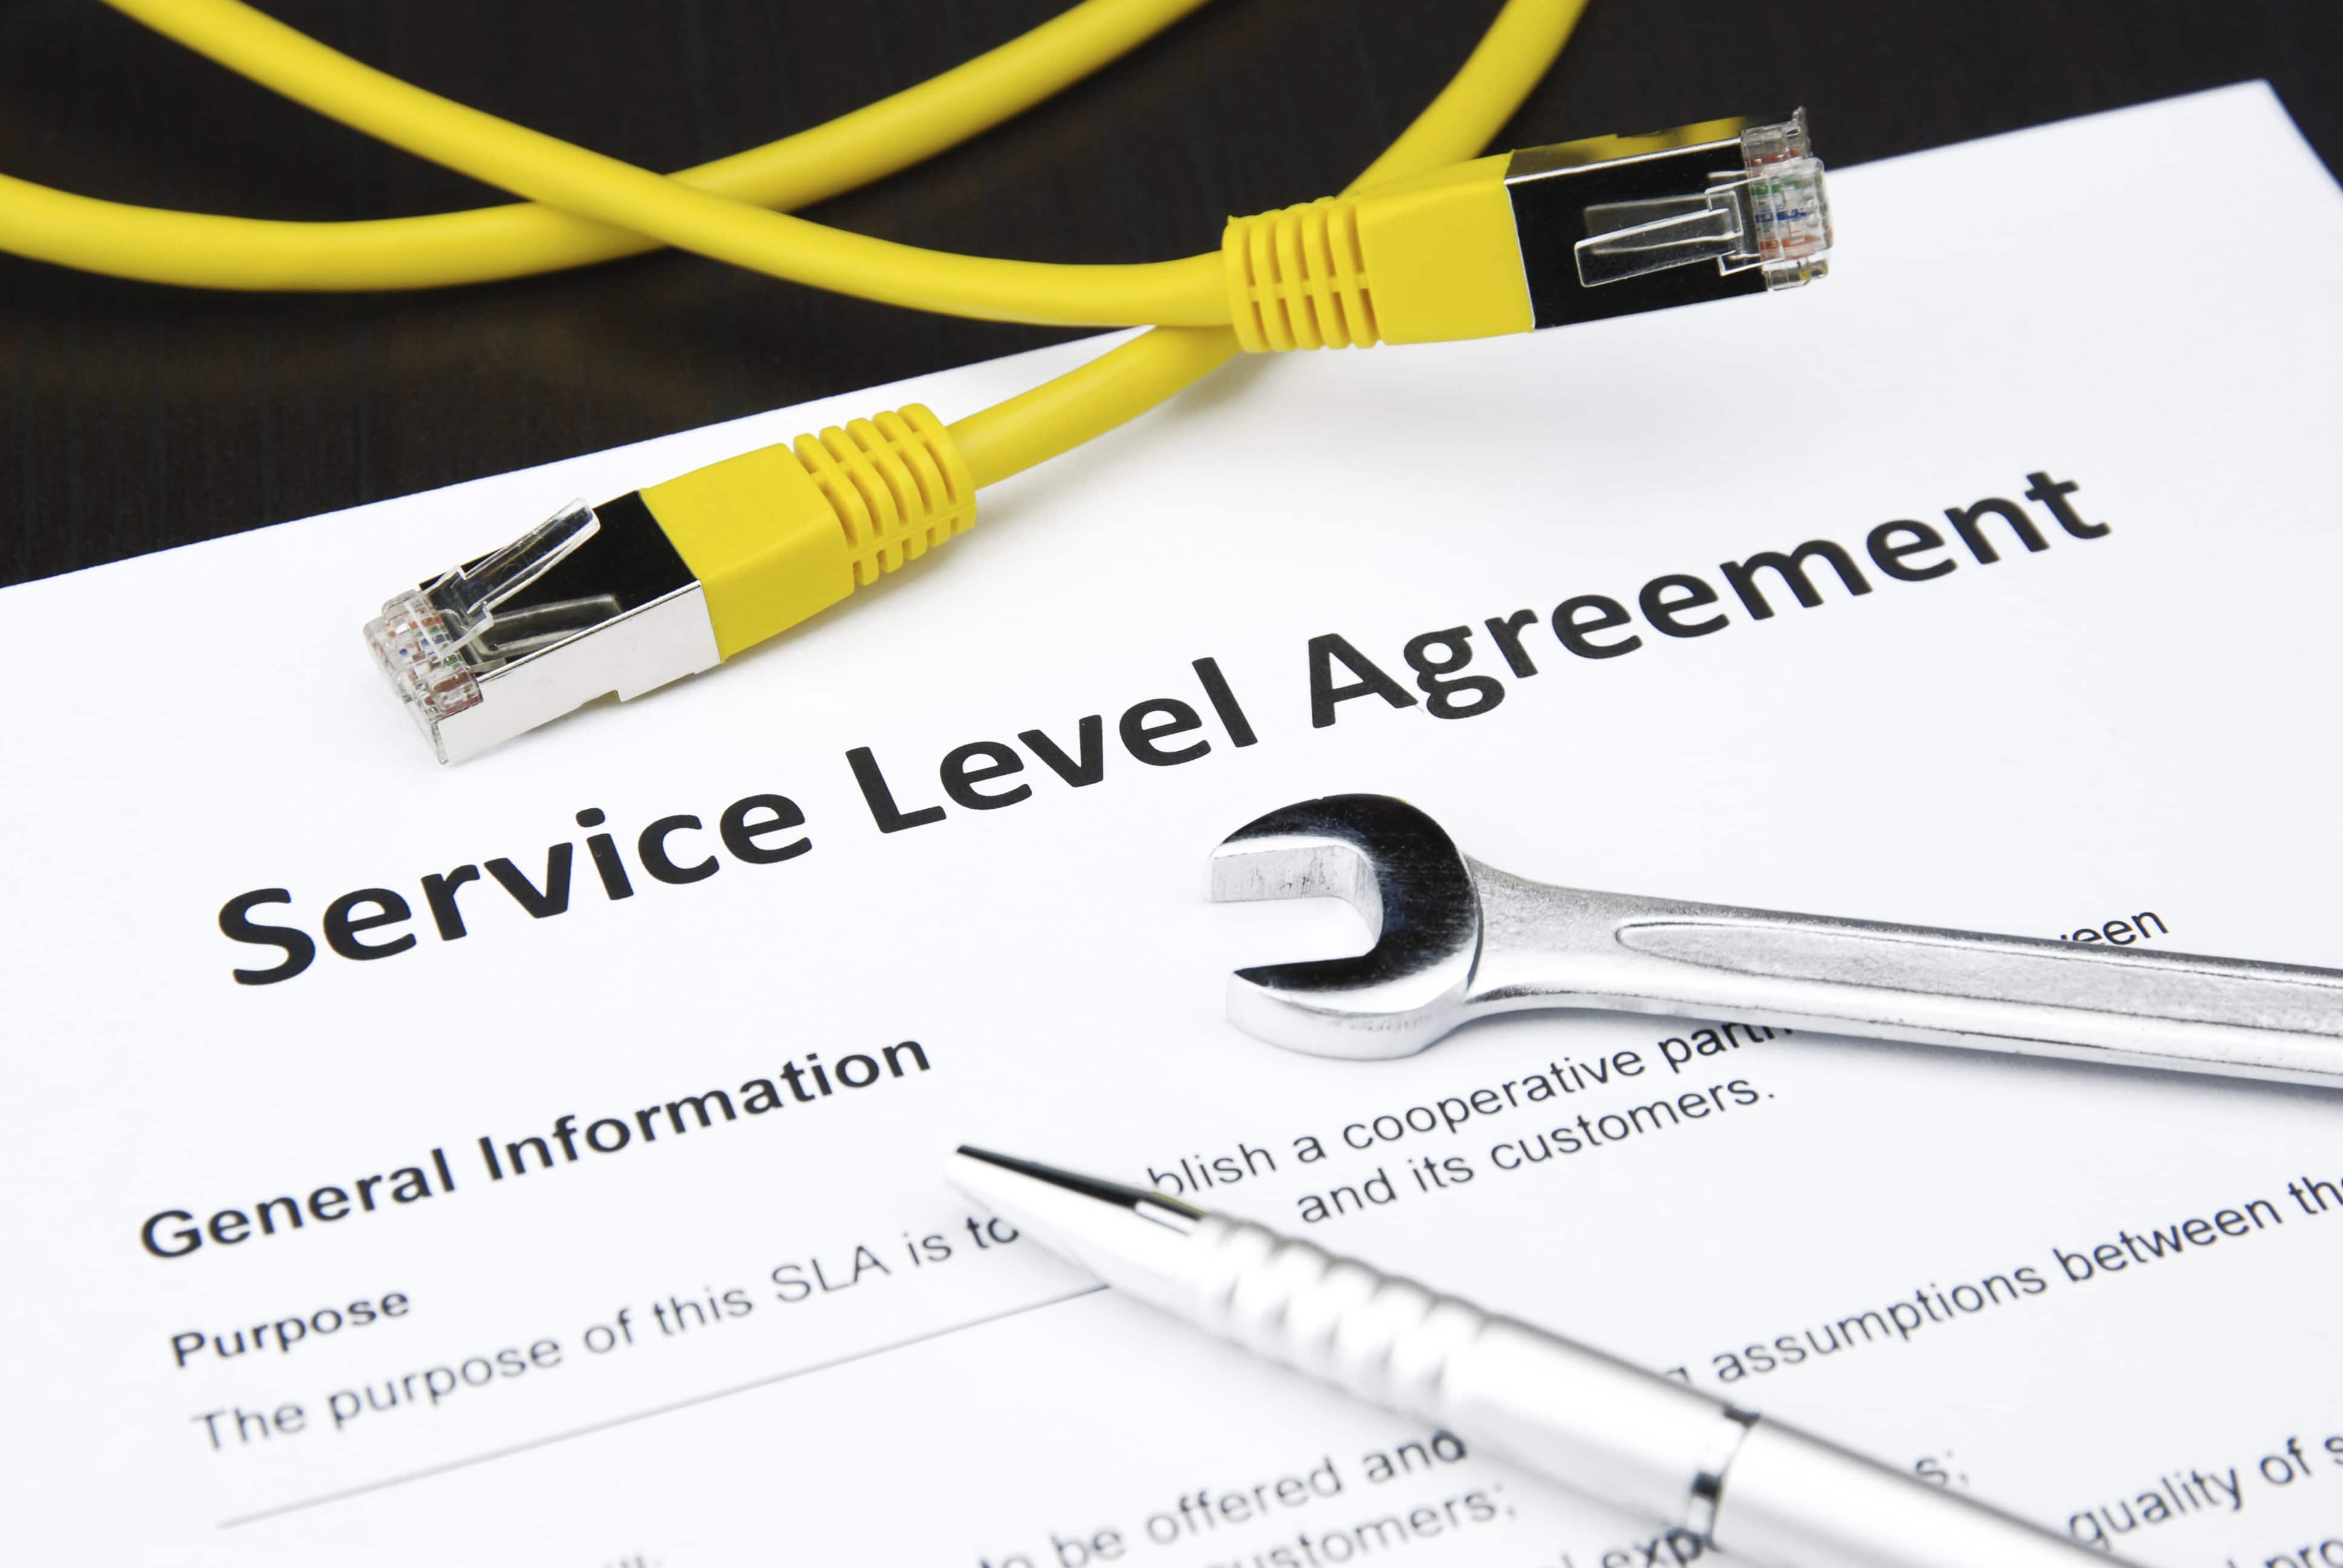 Customized Copier & Network Maintenance Service Contracts